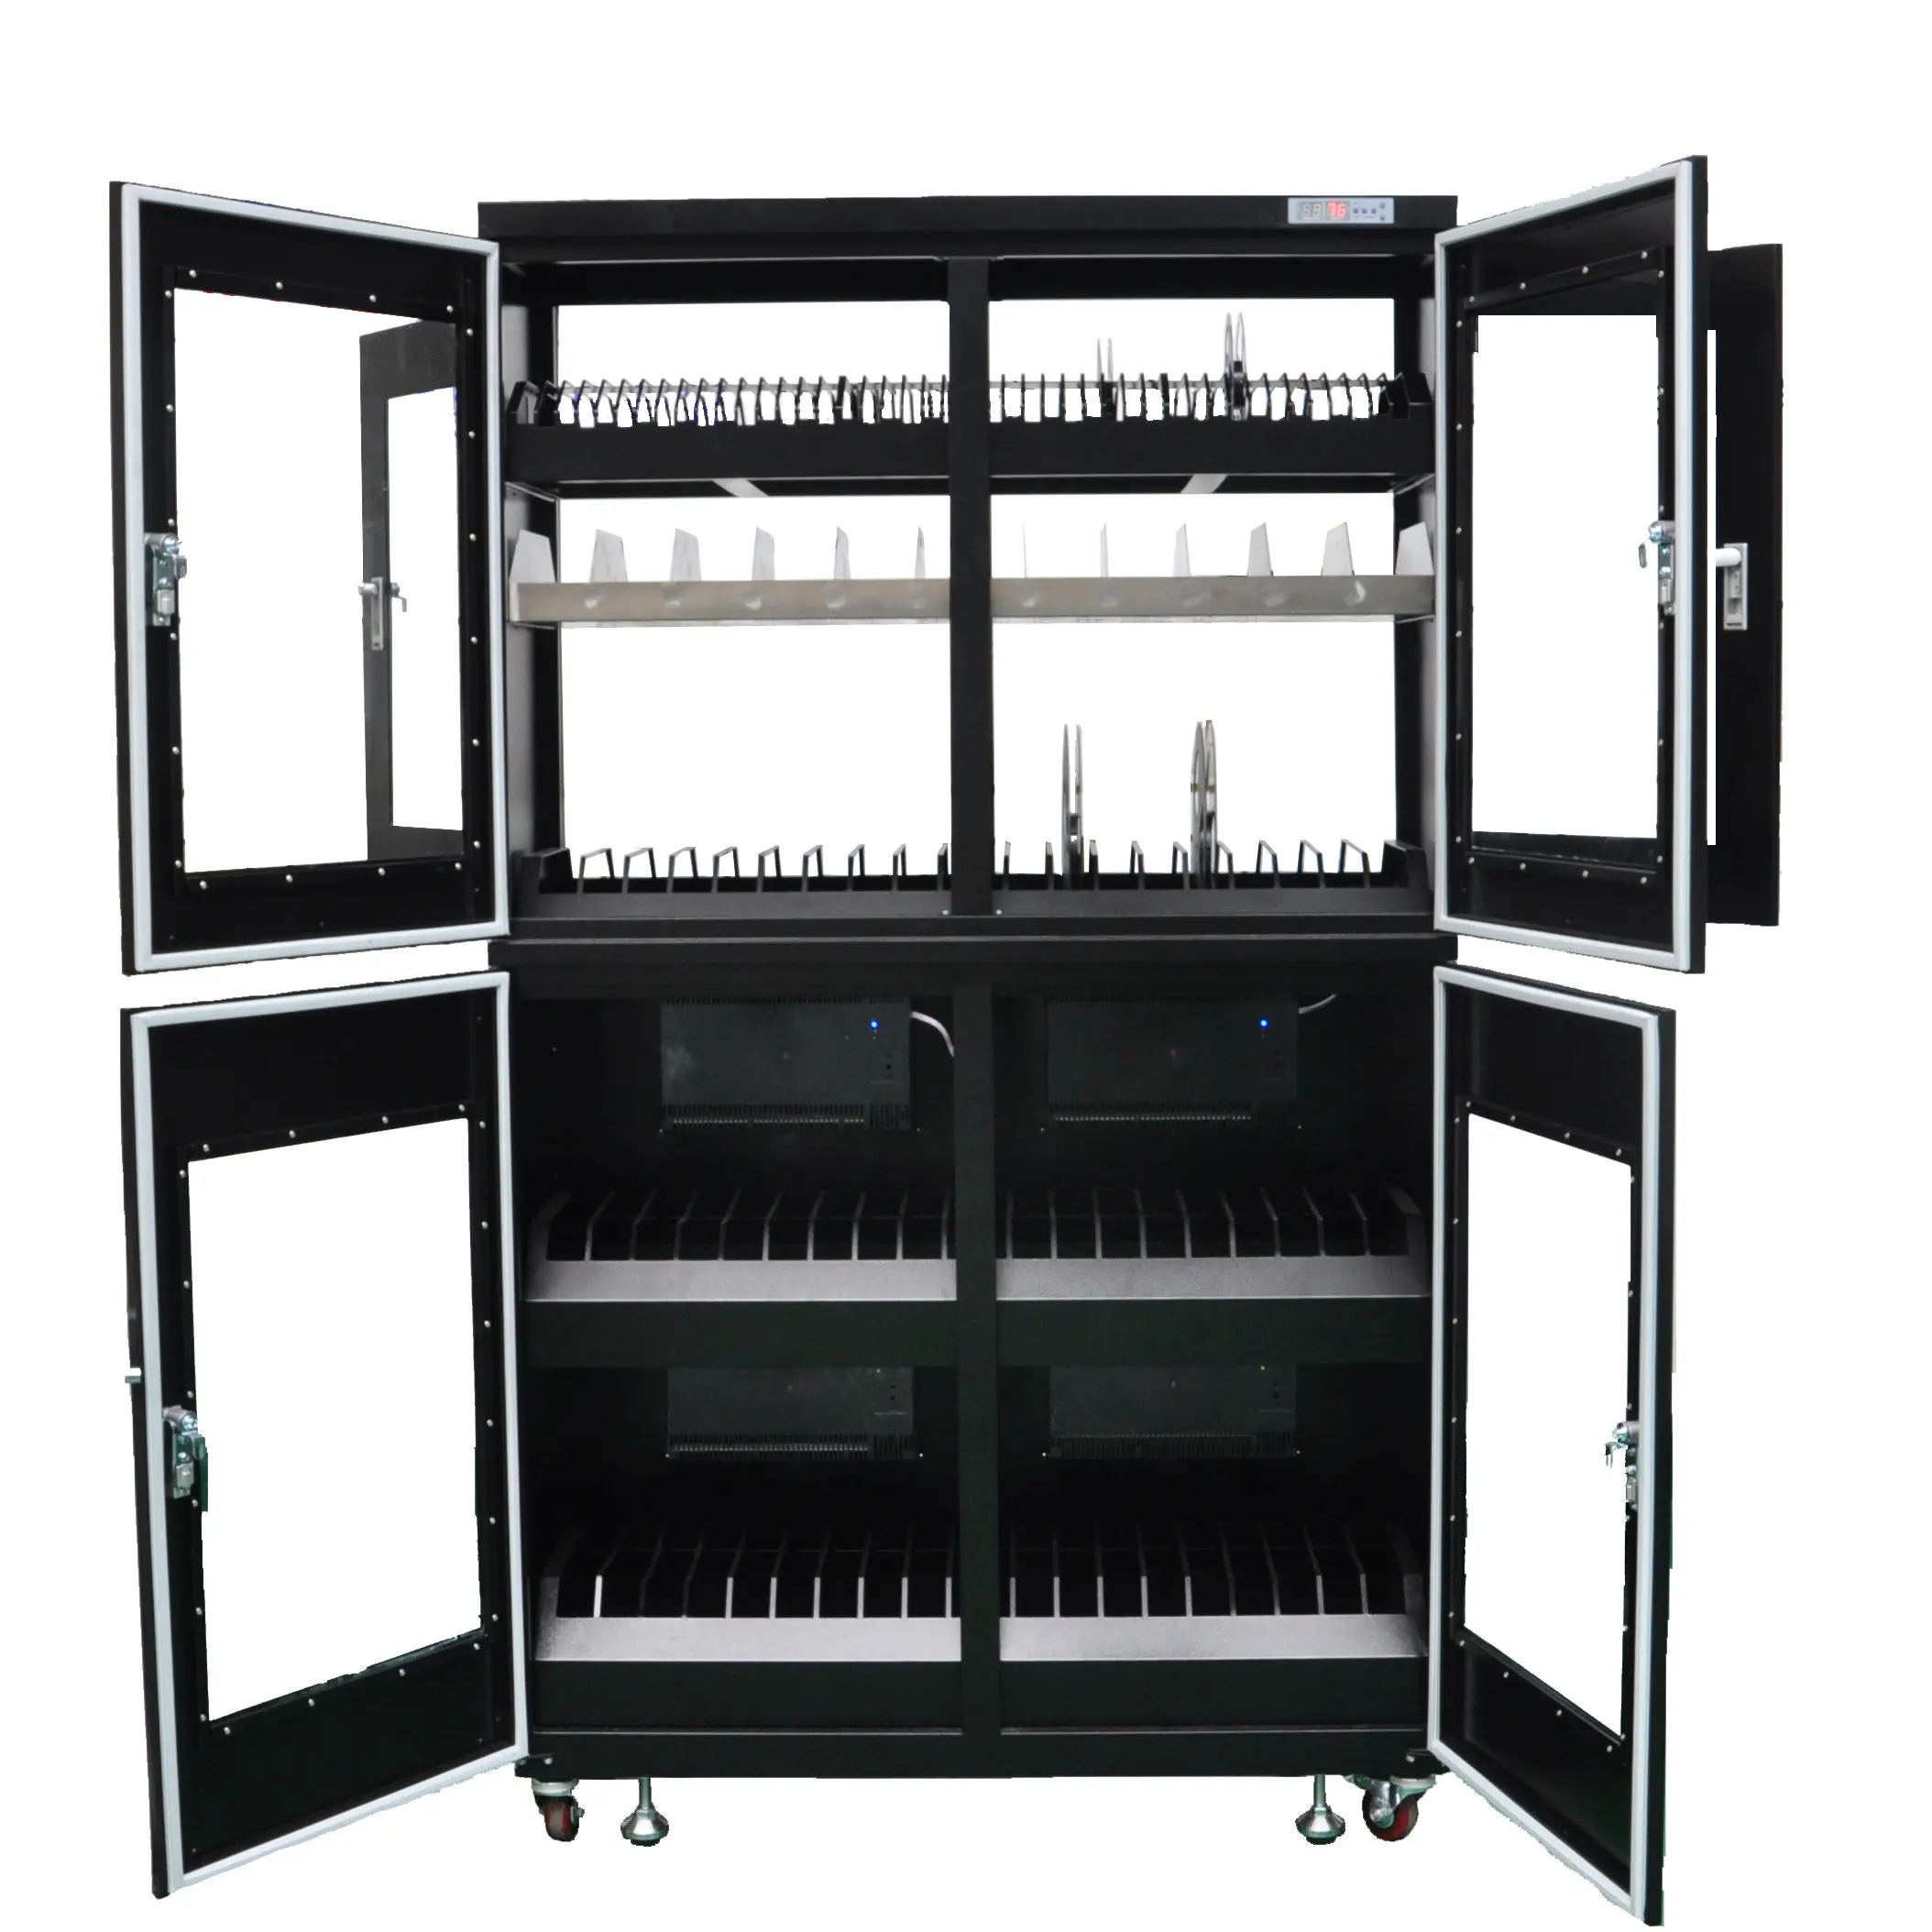 1428L dry cabinet for SMT&SMD tray racks,humidity control dry cabinet for electronic component IC chips